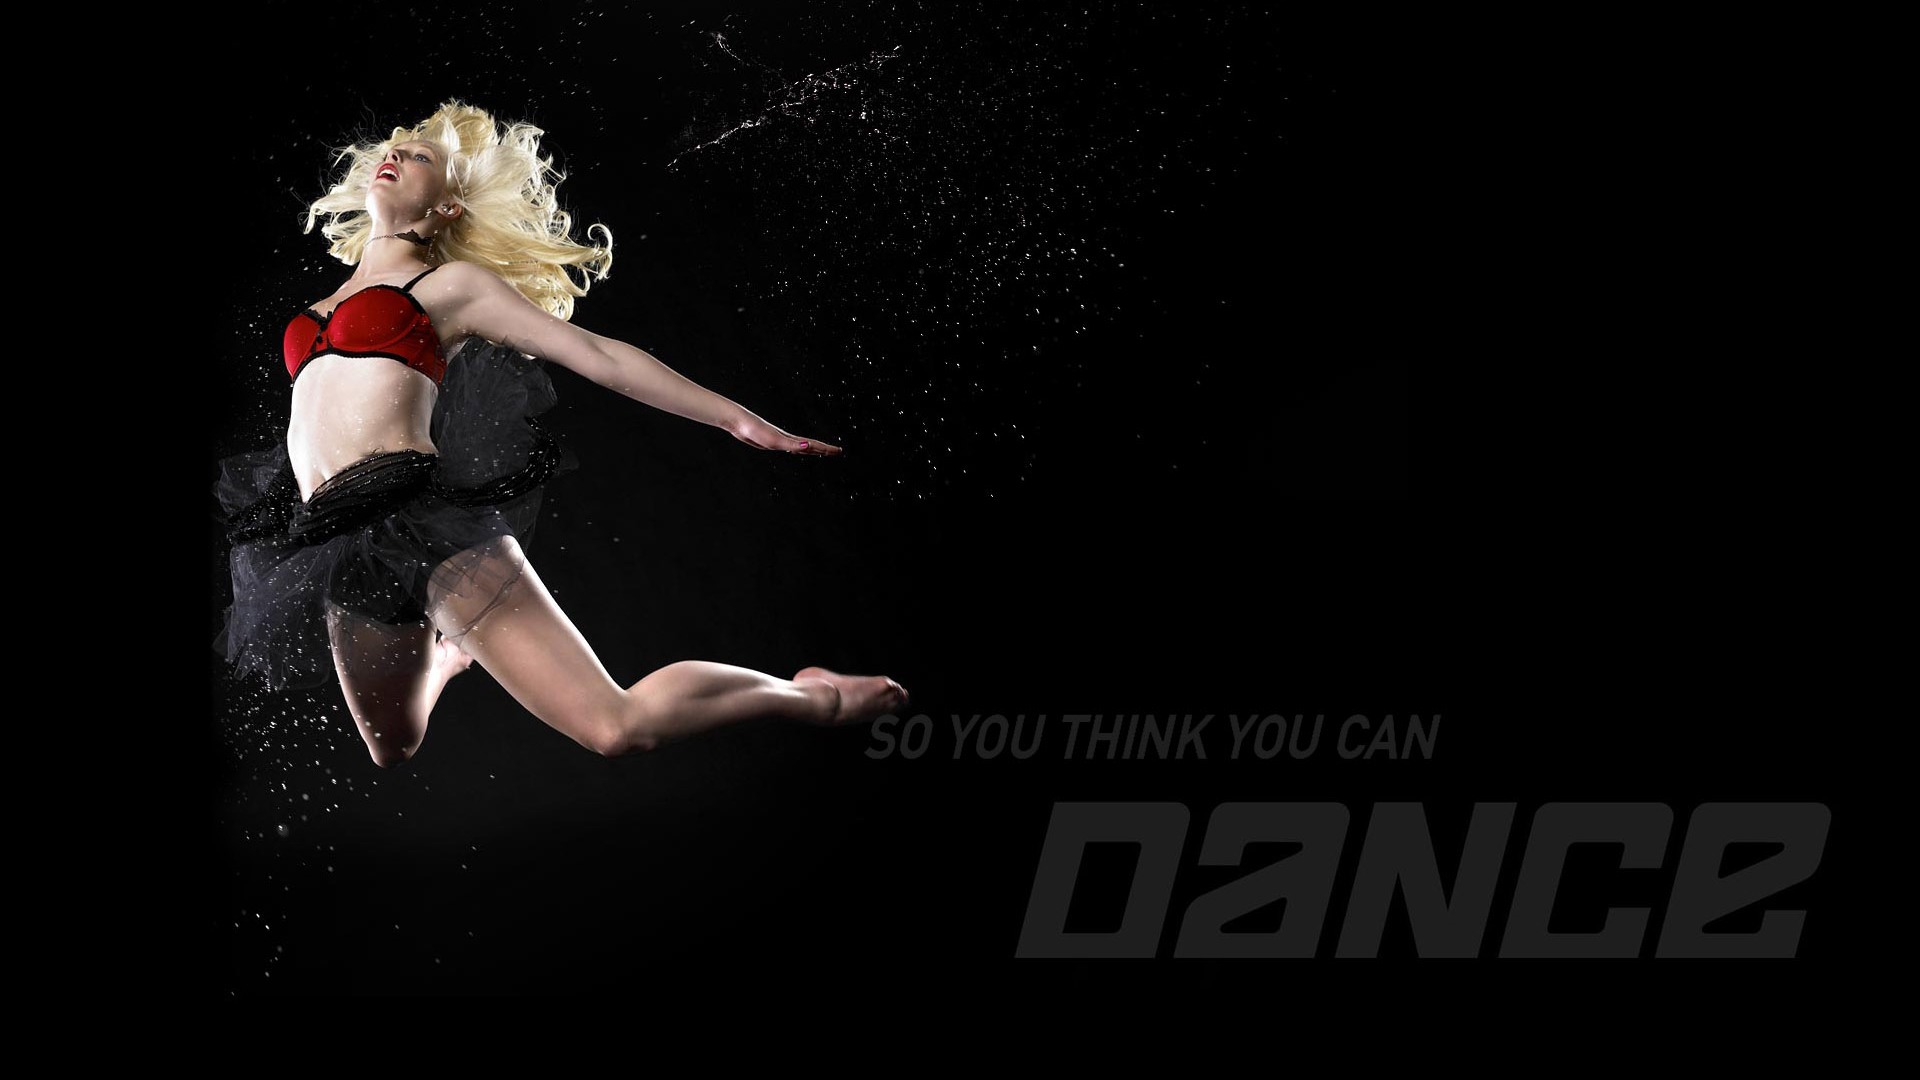 So You Think You Can Dance Wallpaper (1) #13 - 1920x1080